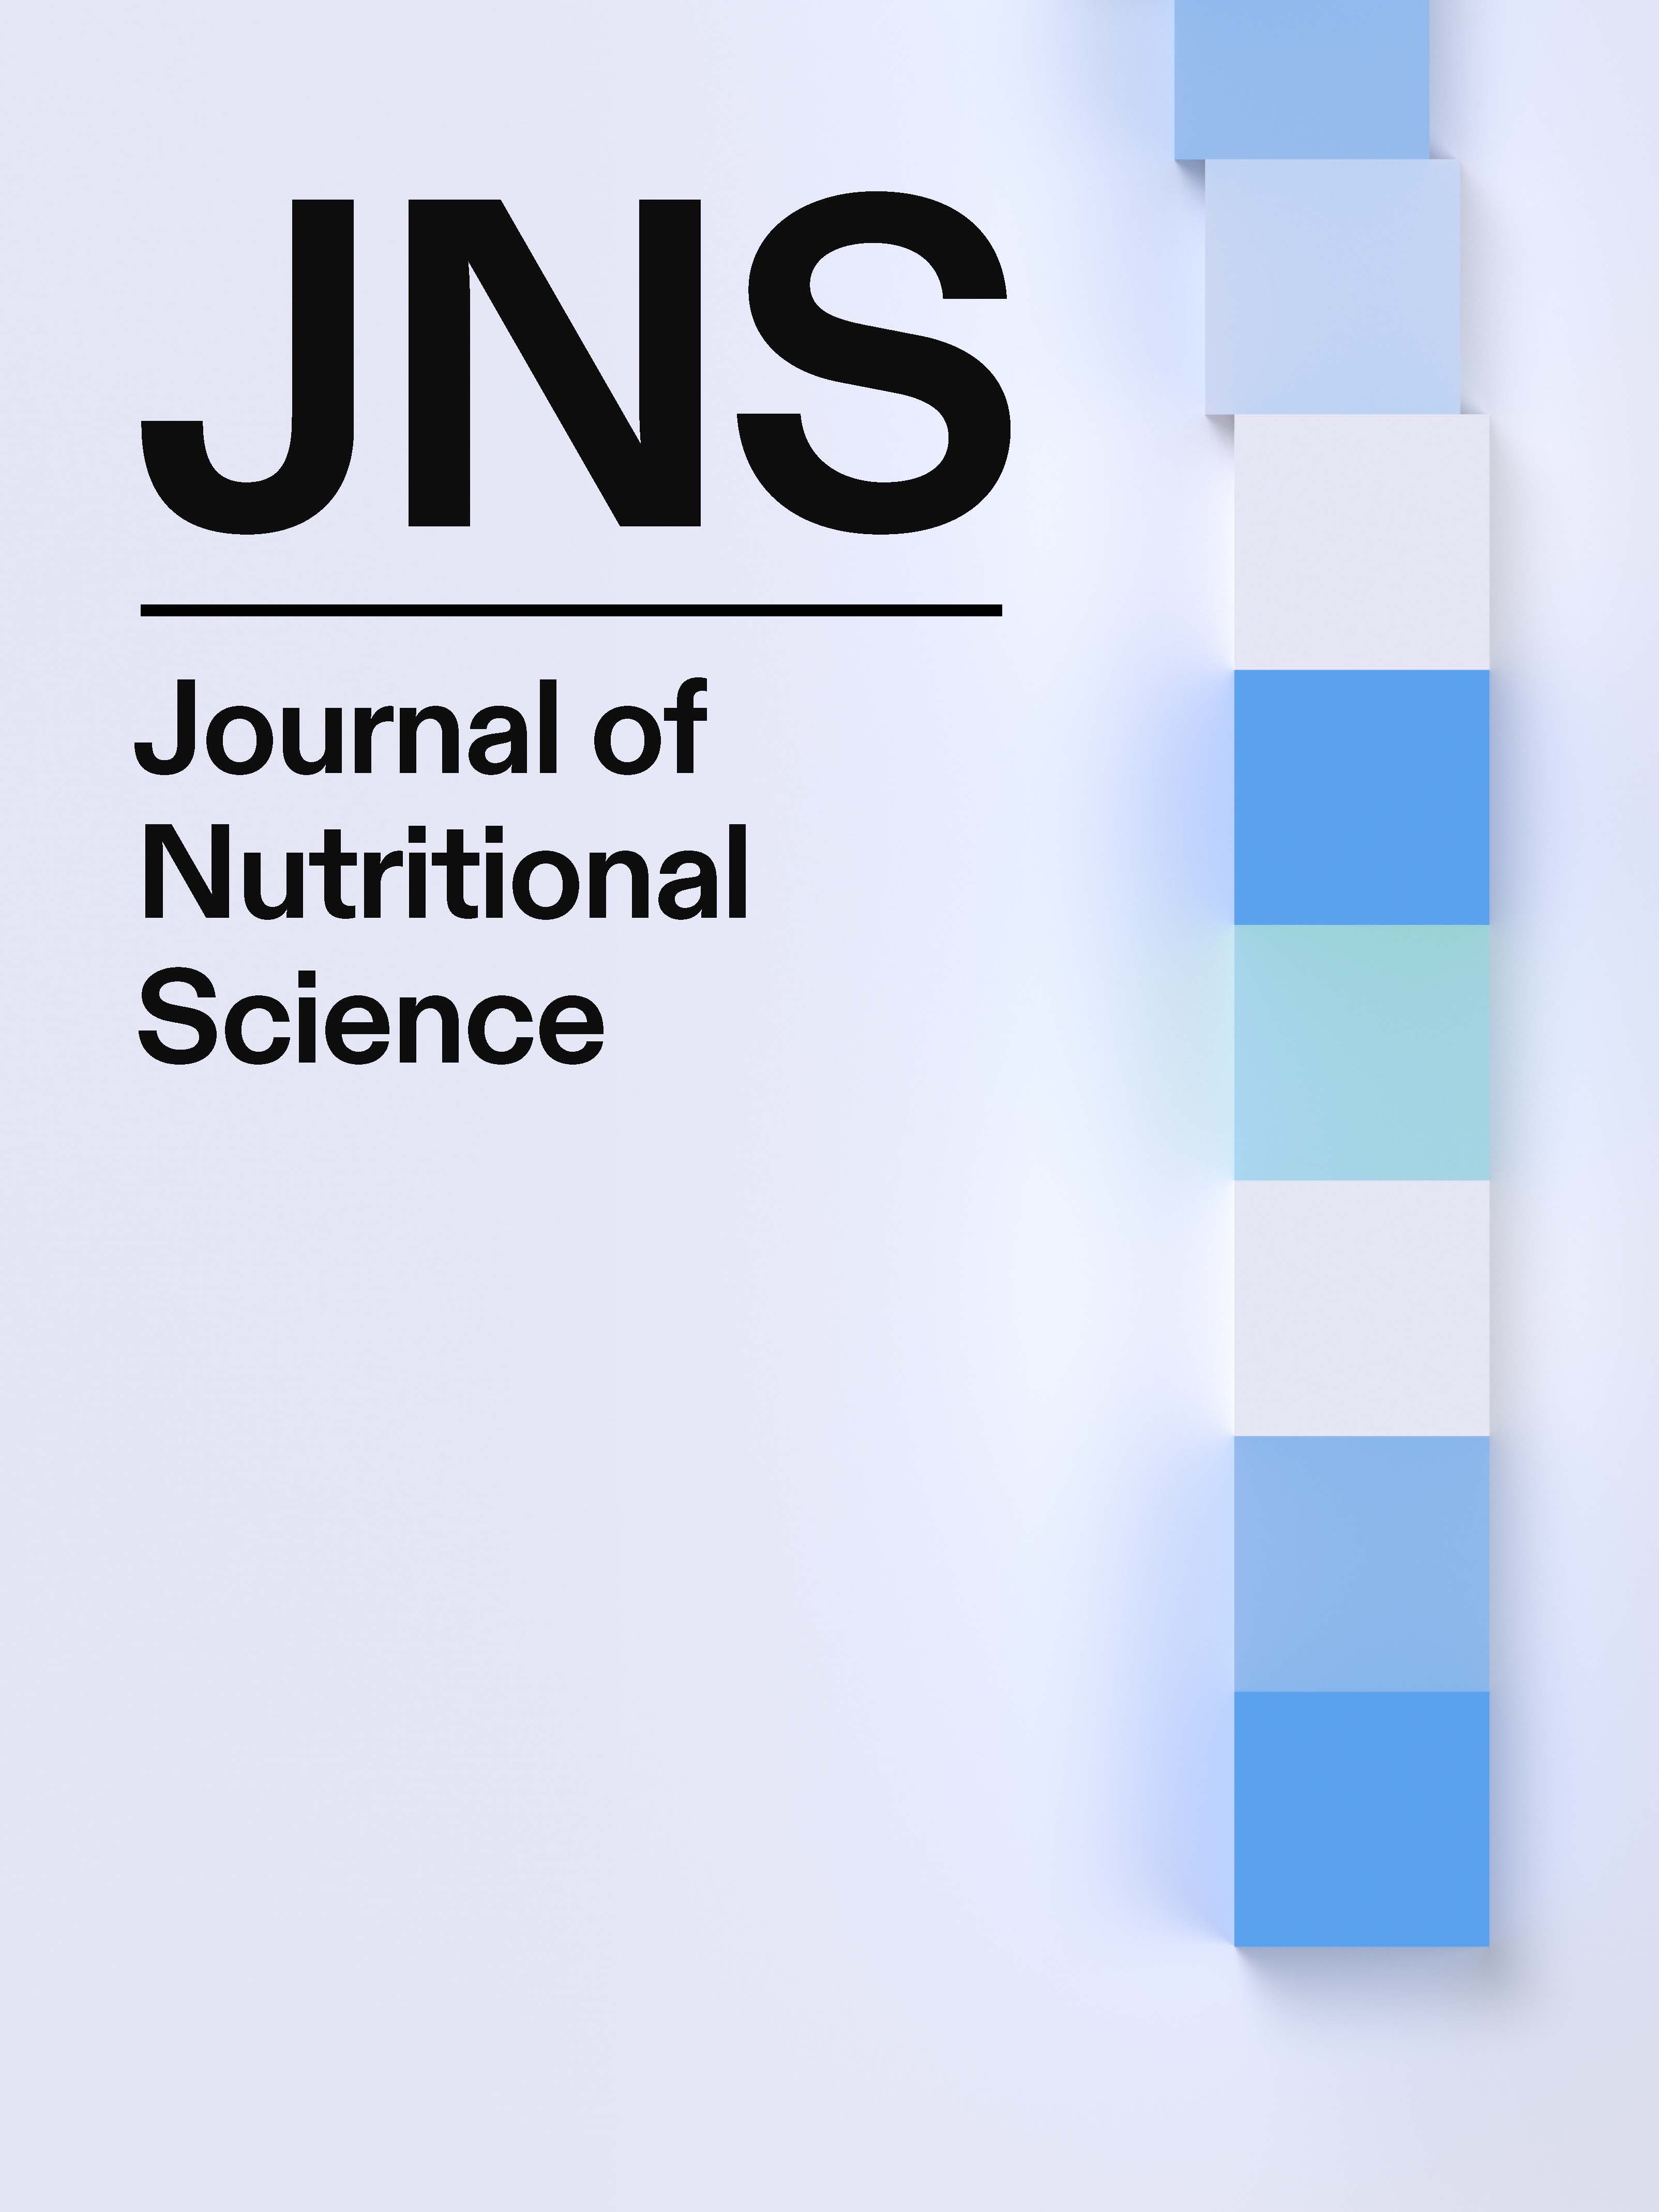 Undergraduate nursing and medical students’ perceptions of food security and access to healthy food in Qatar: a photovoice study | Journal of Nutritional